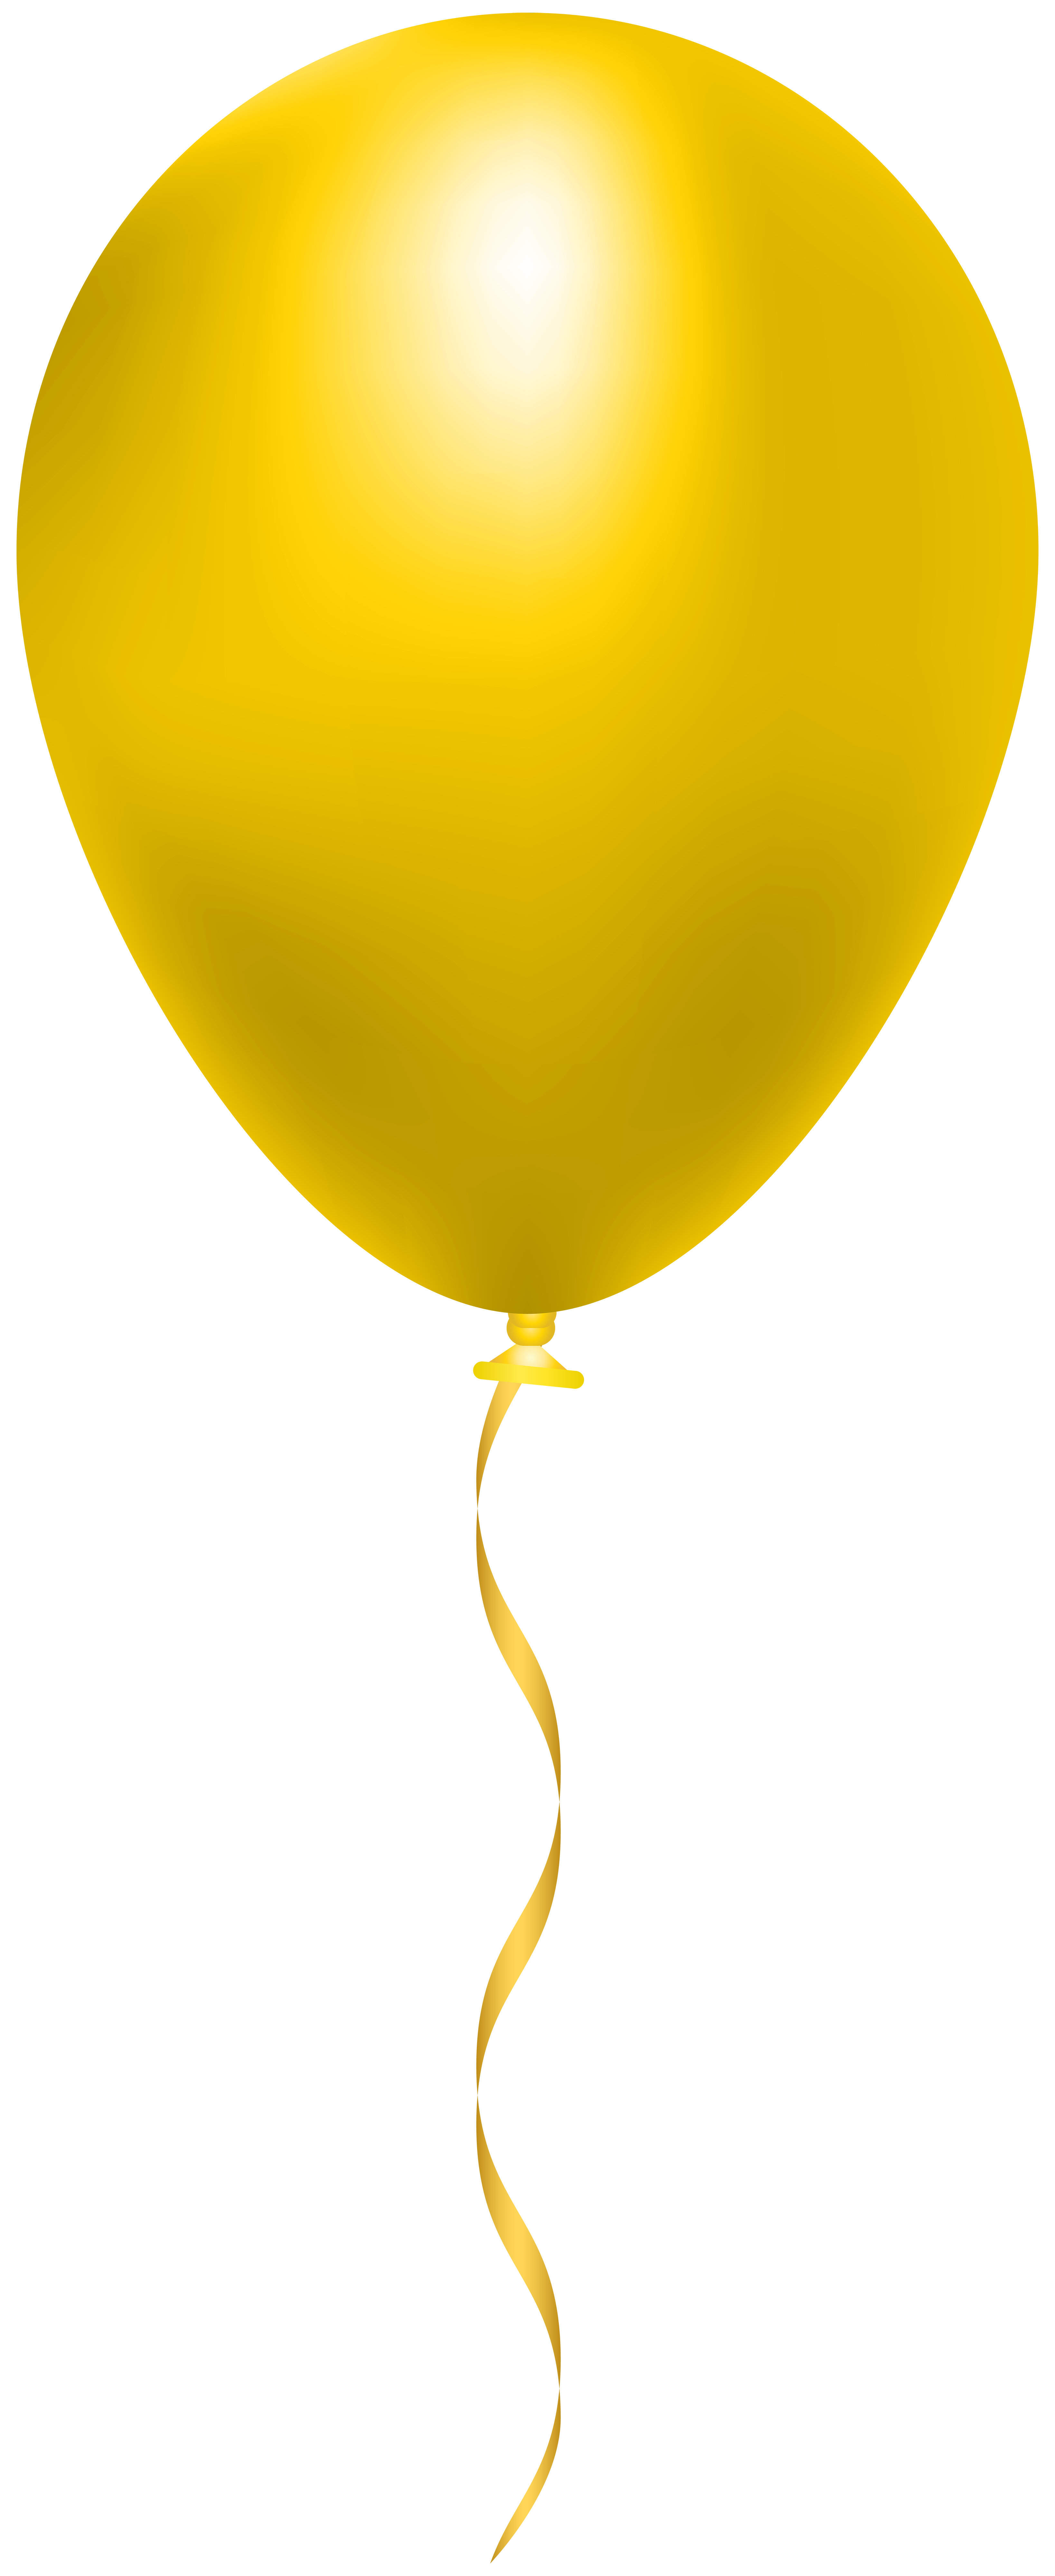 Yellow Balloon PNG Clip Art Image | Gallery Yopriceville - High-Quality ...